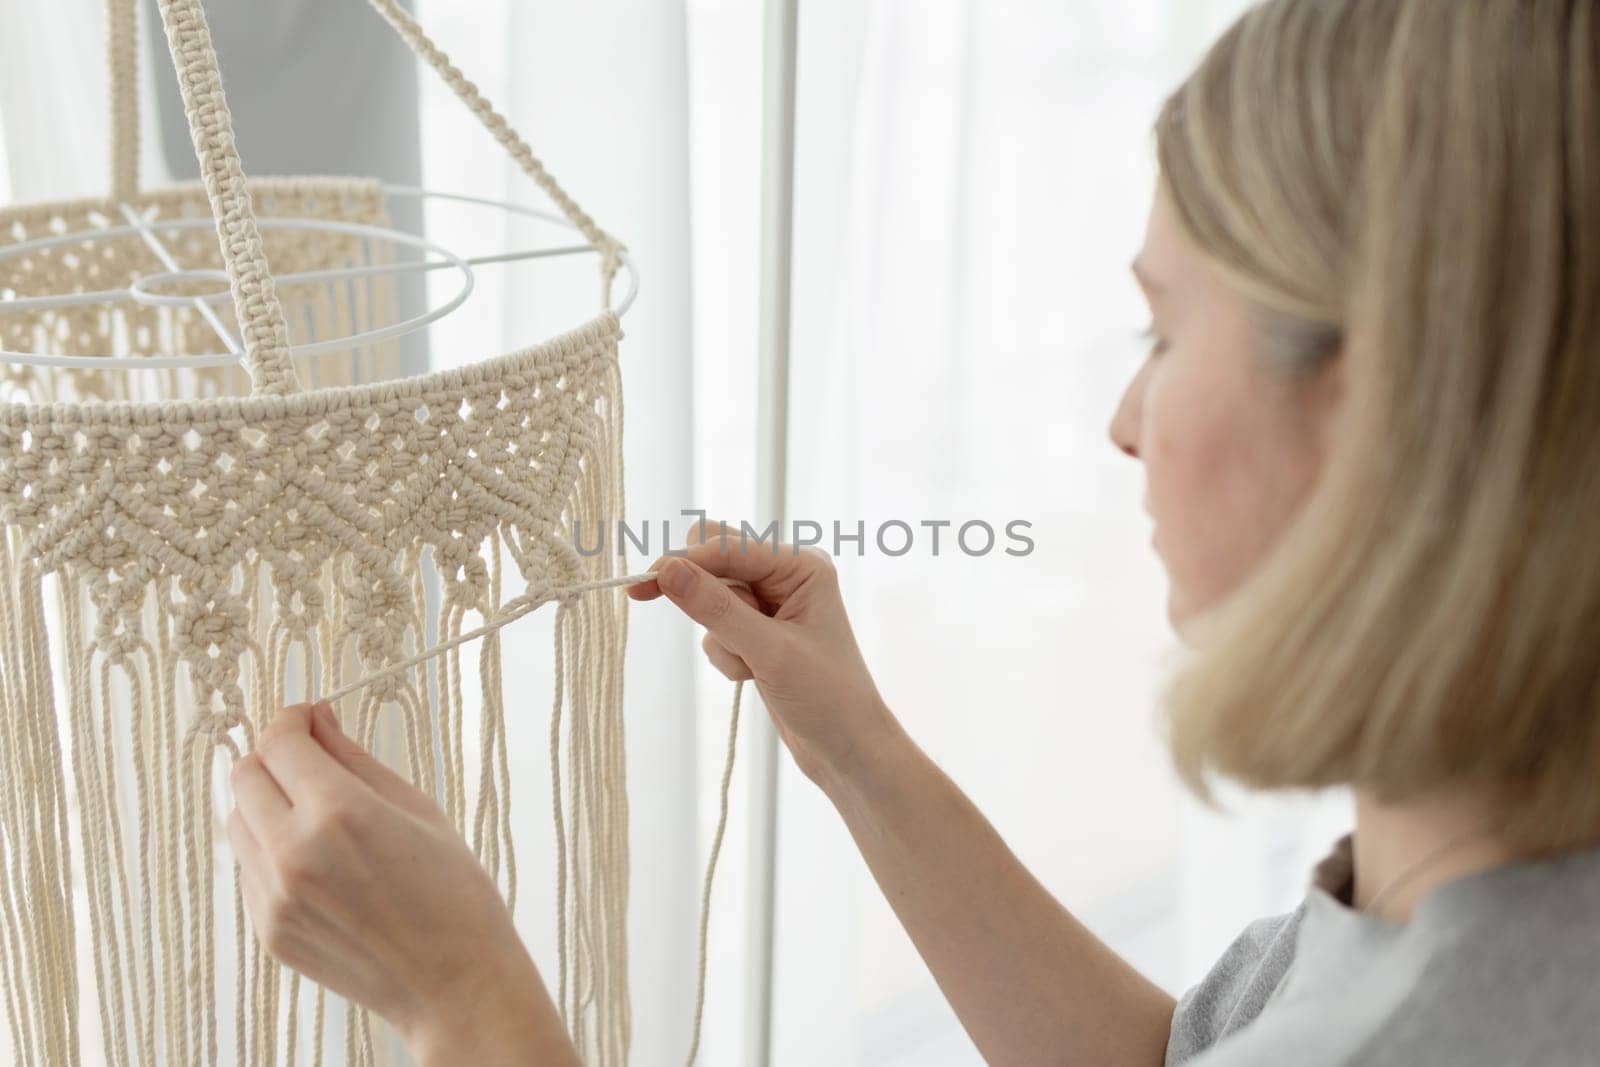 Woman making macrame lampshade using white cord to tie the strings together. Woman knits lampshade for interior using macrame technique by dmitryz